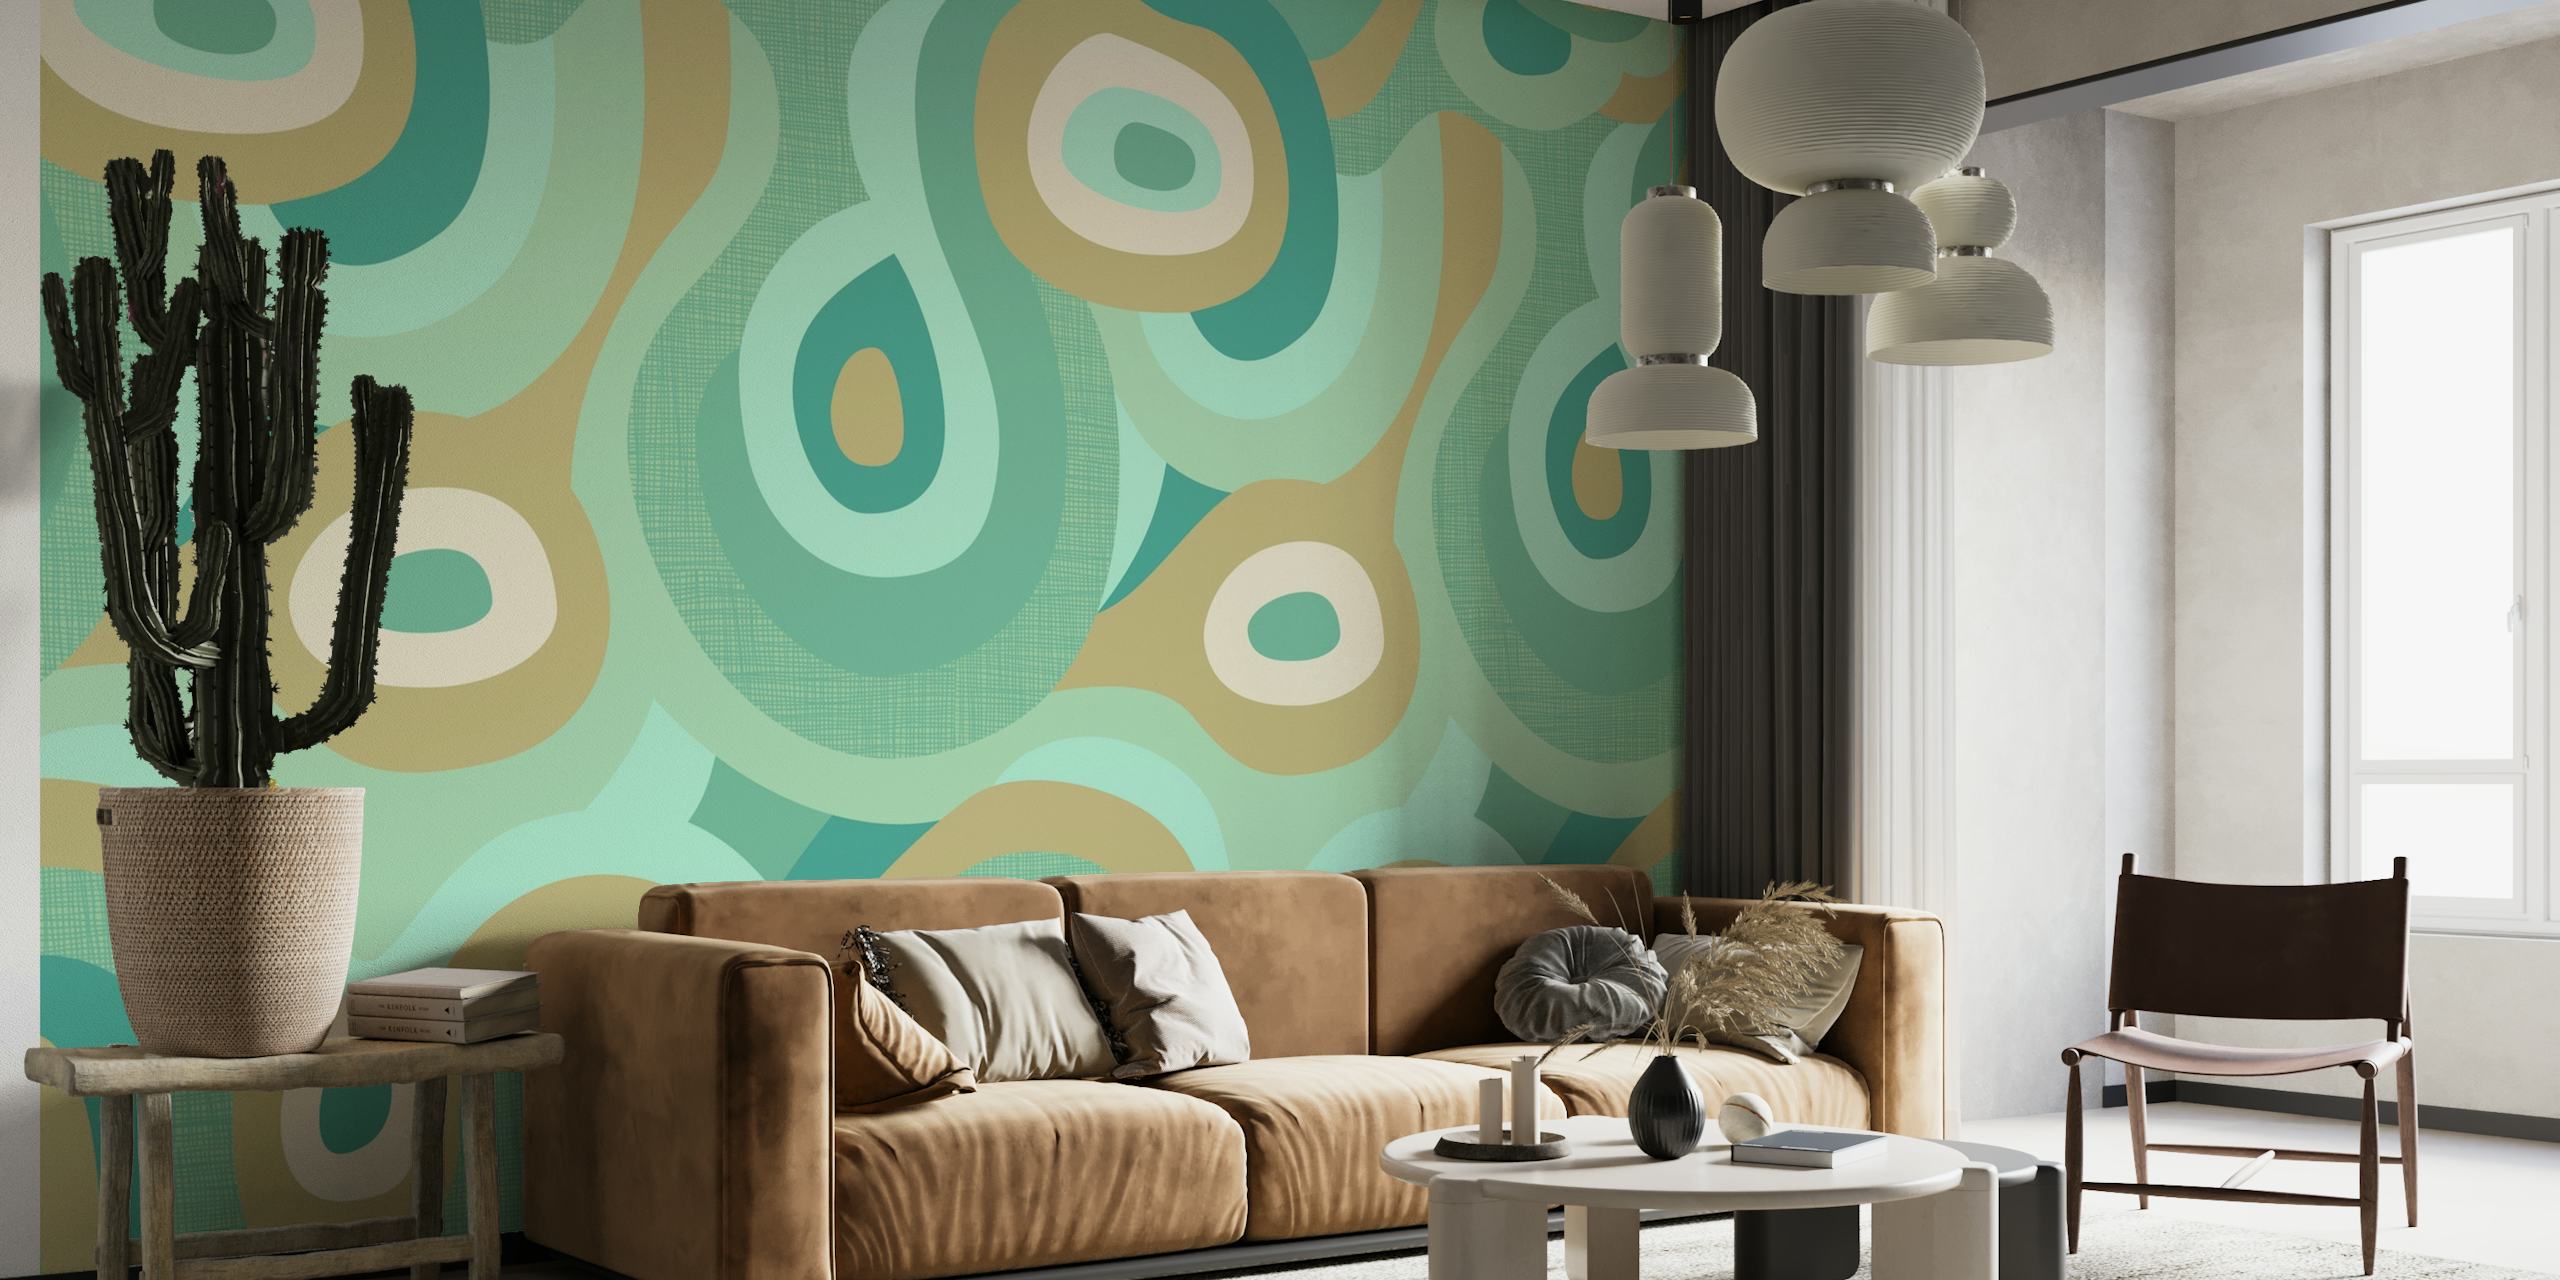 Groovy Wavy Aqua Green Wall Mural with Retro Wavy Patterns in Soft Blues and Greens